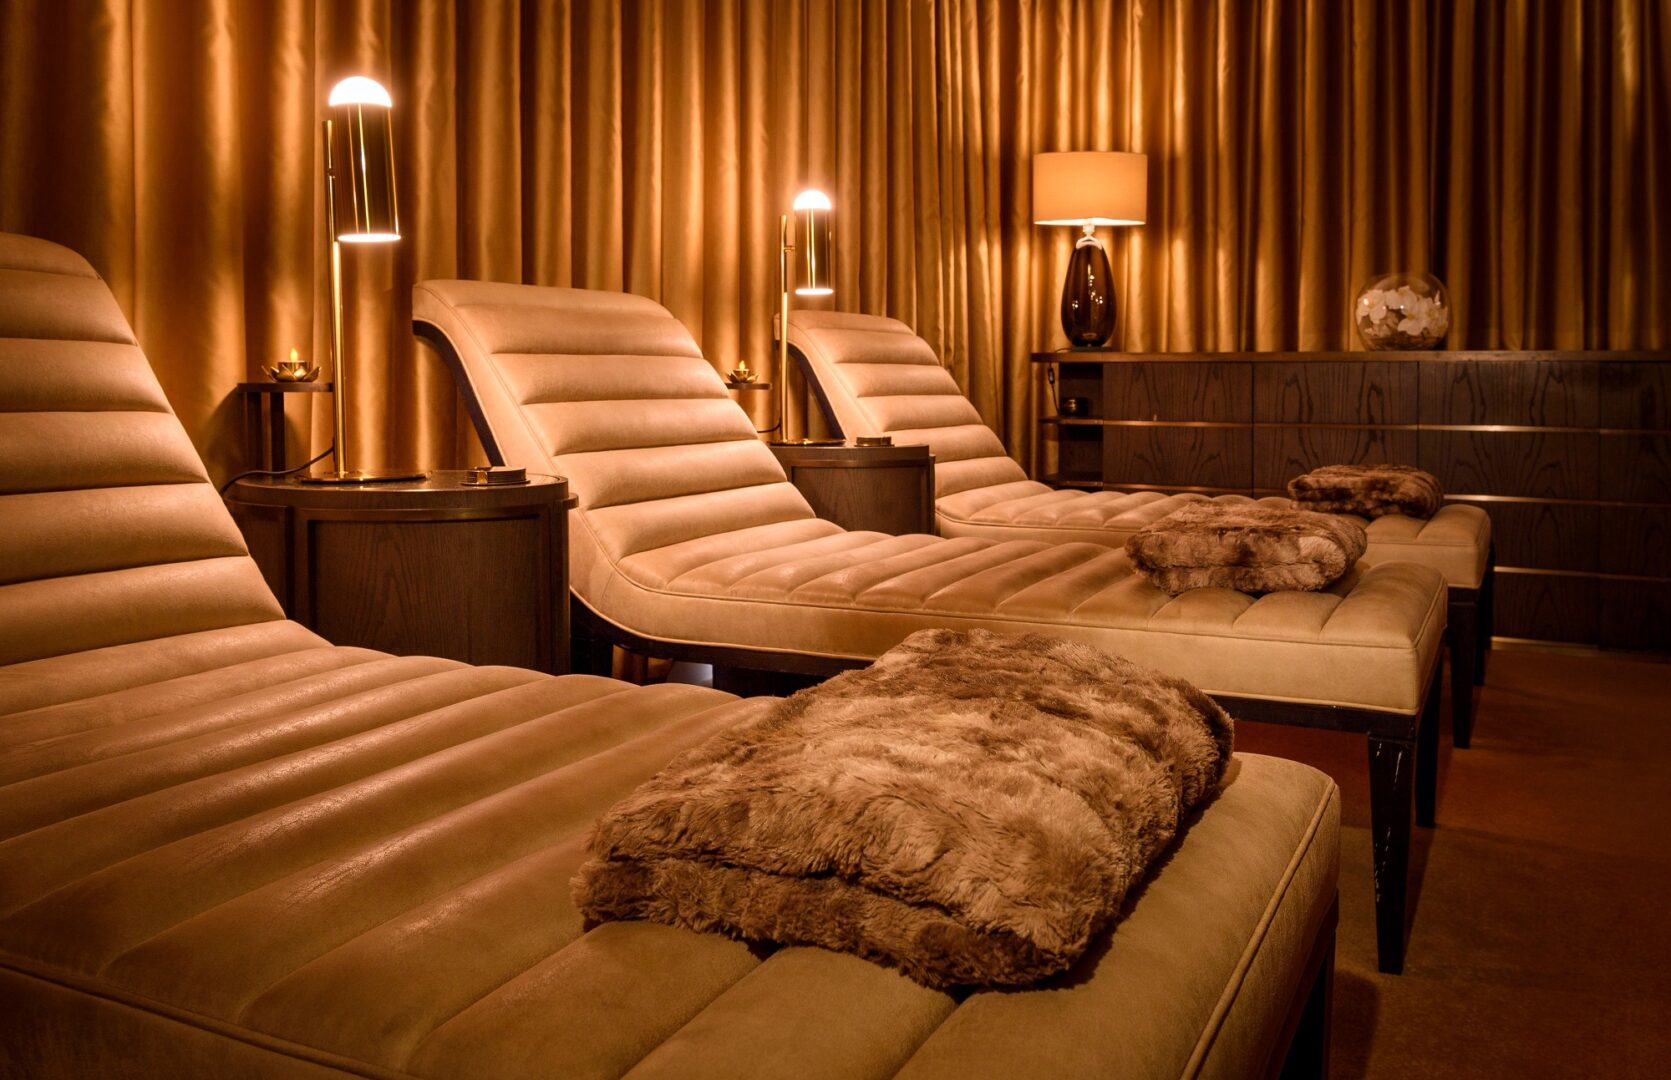 Image of spa beds at The Waldorf Astoria hotel